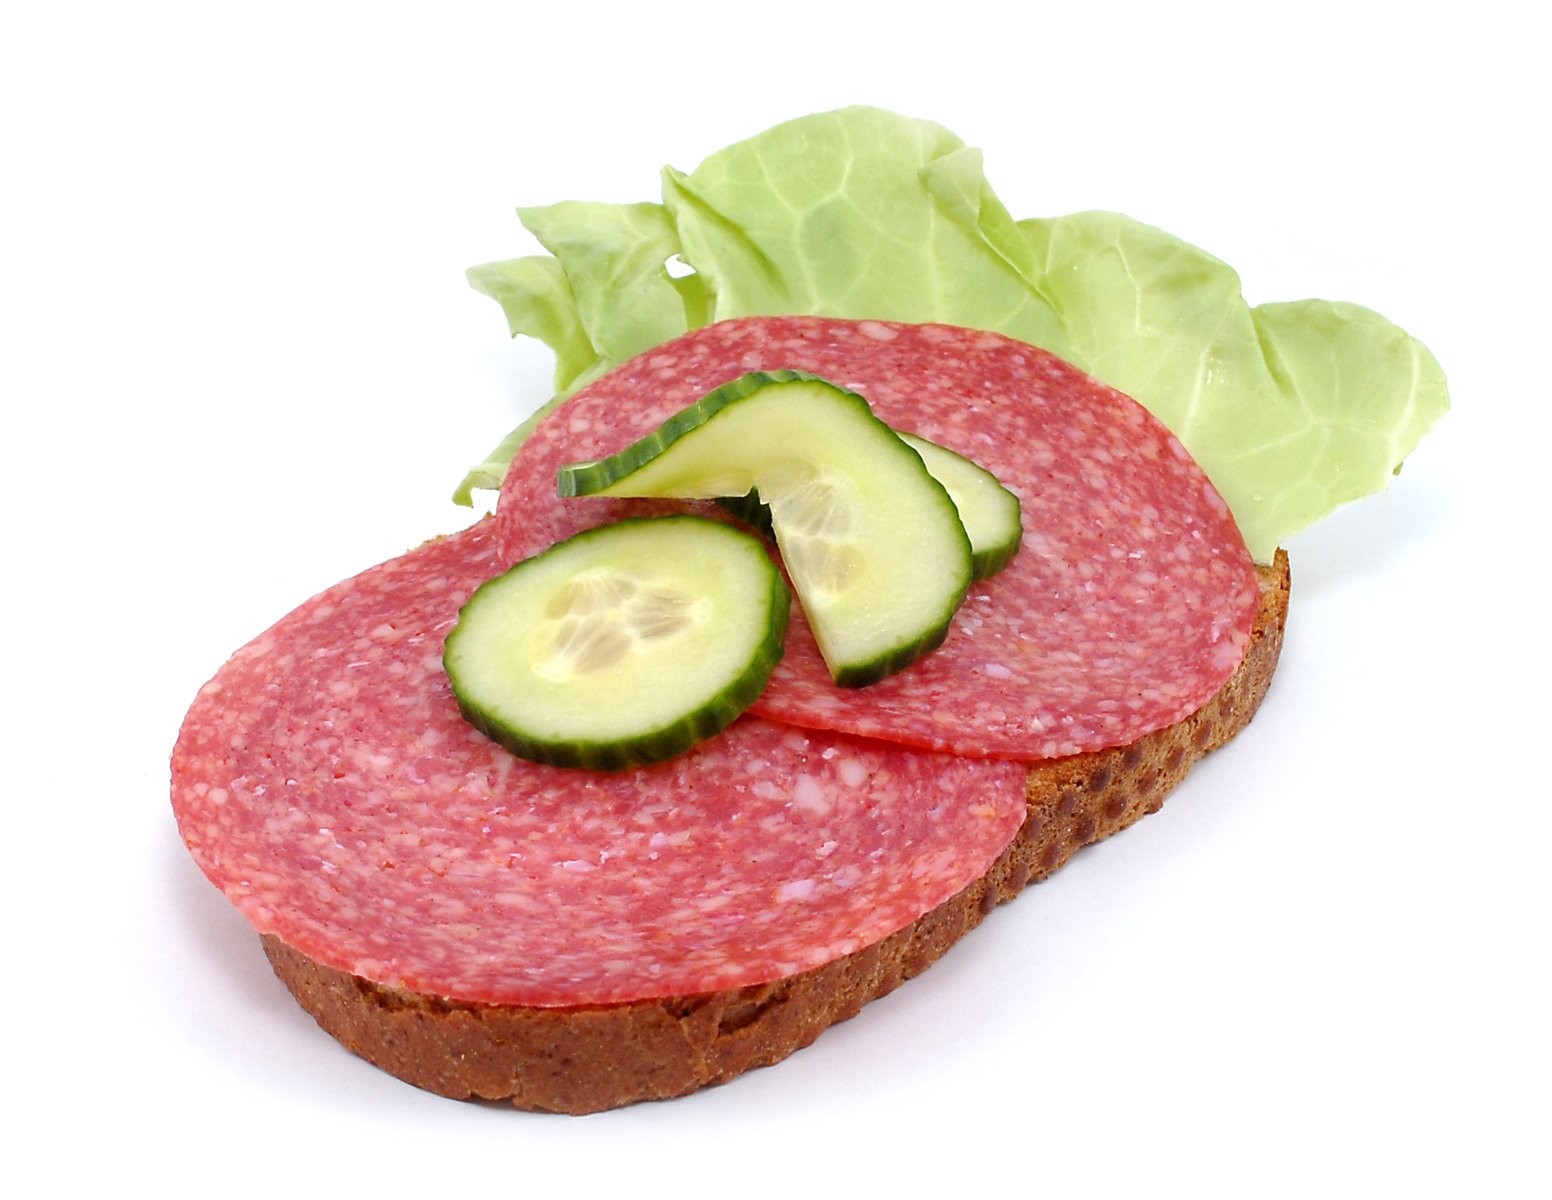 a sandwich of meat with cucumber slices, lettuce and lettuce